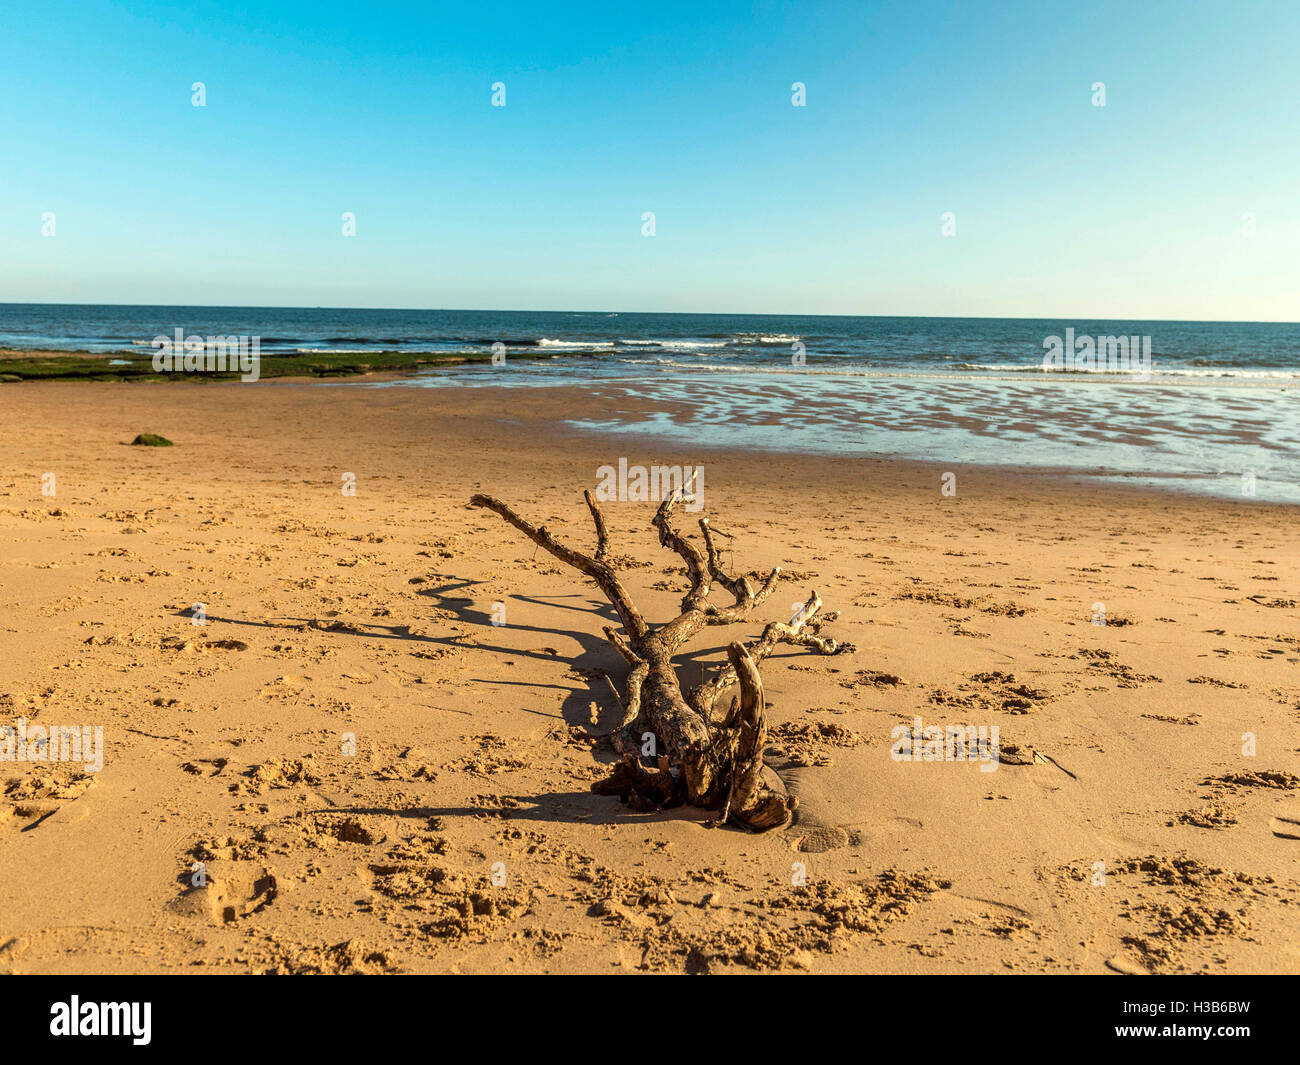 Autumn sunshine, blue skies, sand, seaweed and isolated wood debris visible at low tide near the seaside town of Exmouth, Devon. Stock Photo